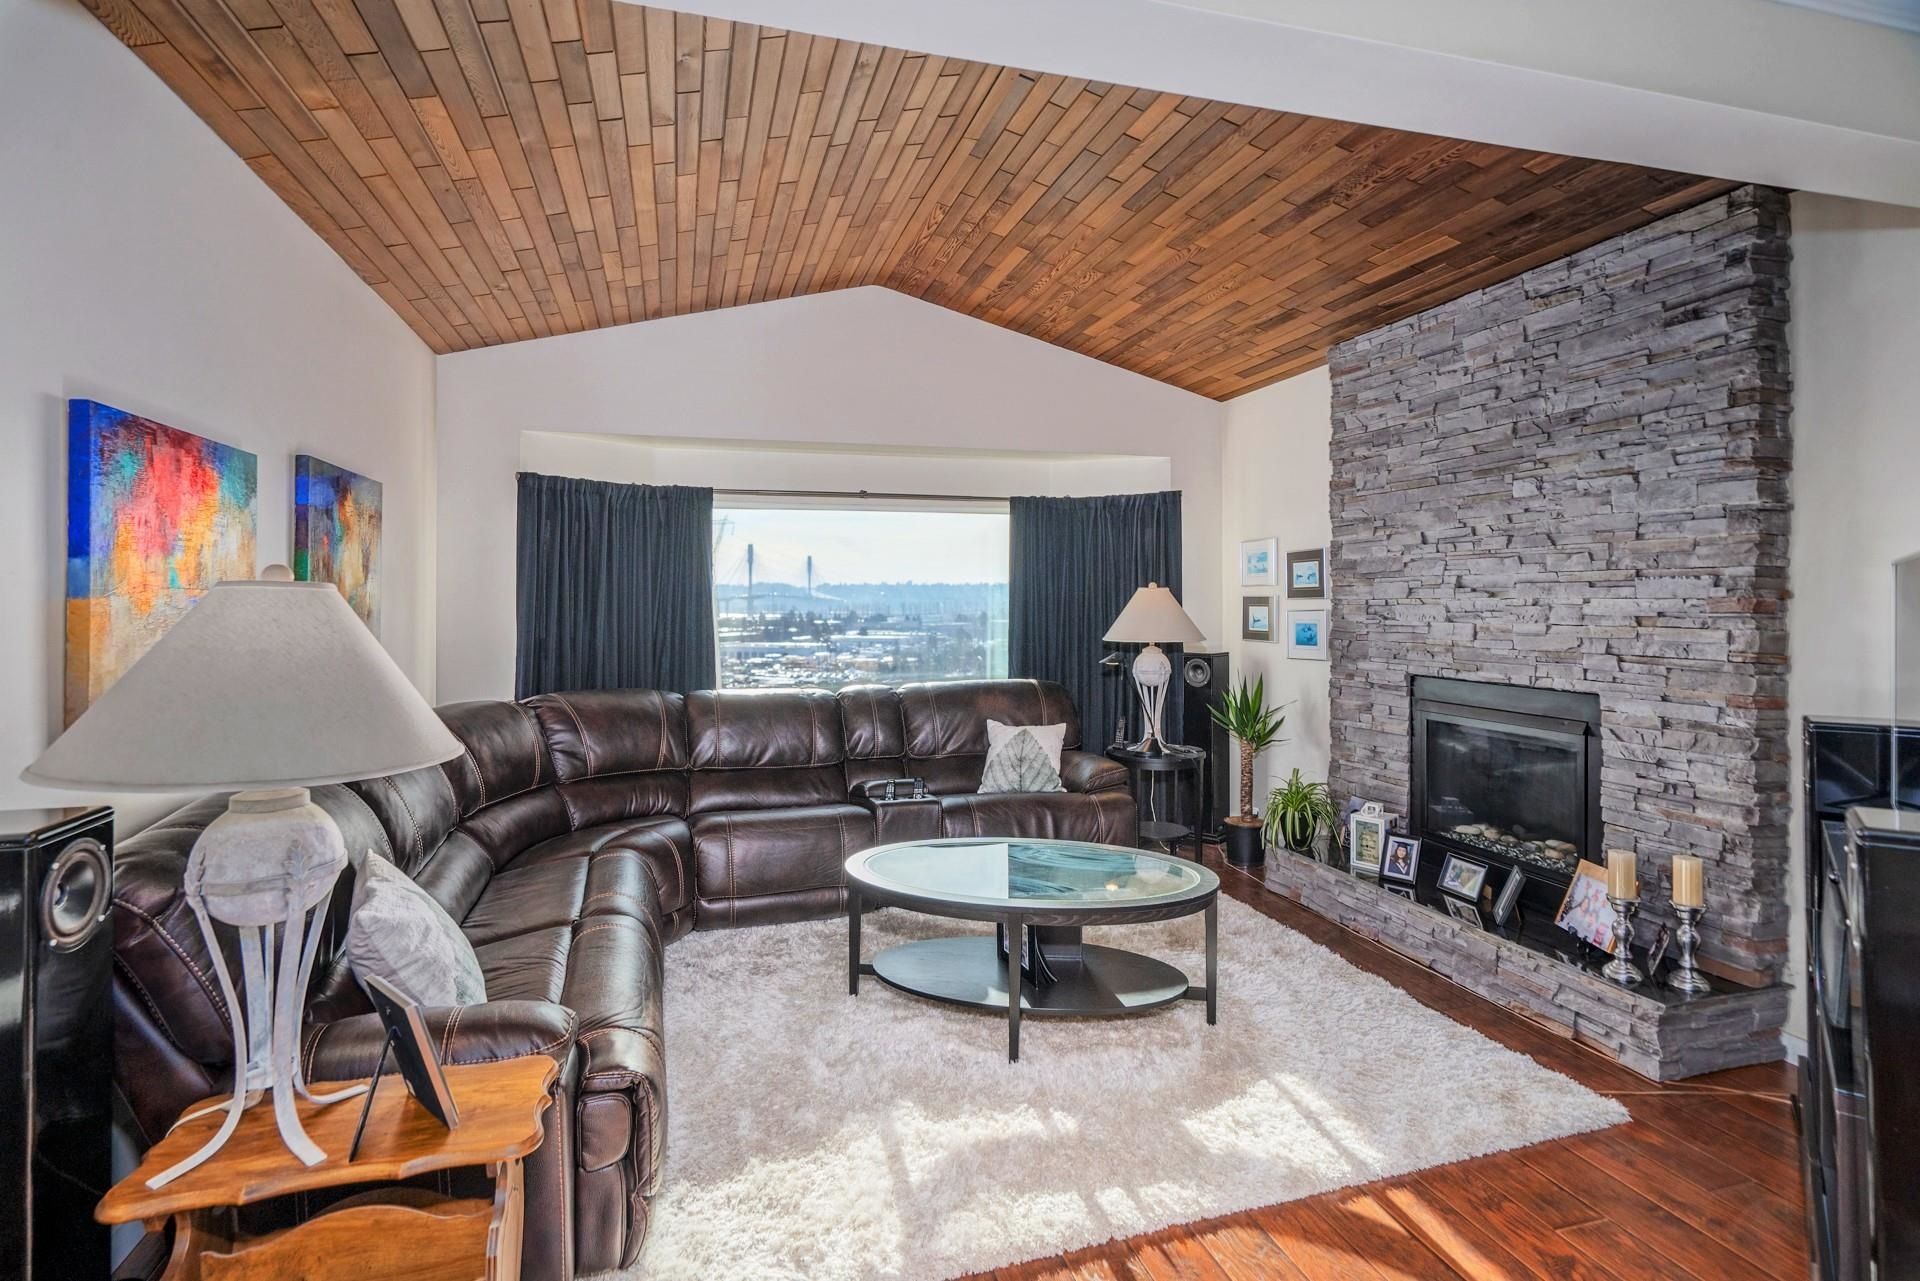 Huge Living Room with Amazing Unobstructed Views of Mt. Baker, Cascade Mountains & Port Mann Bridge. Gorgeous floor to ceiling stone gas fireplace; beautiful wood cedar vaulted ceiling; engineered wood floor throughout.